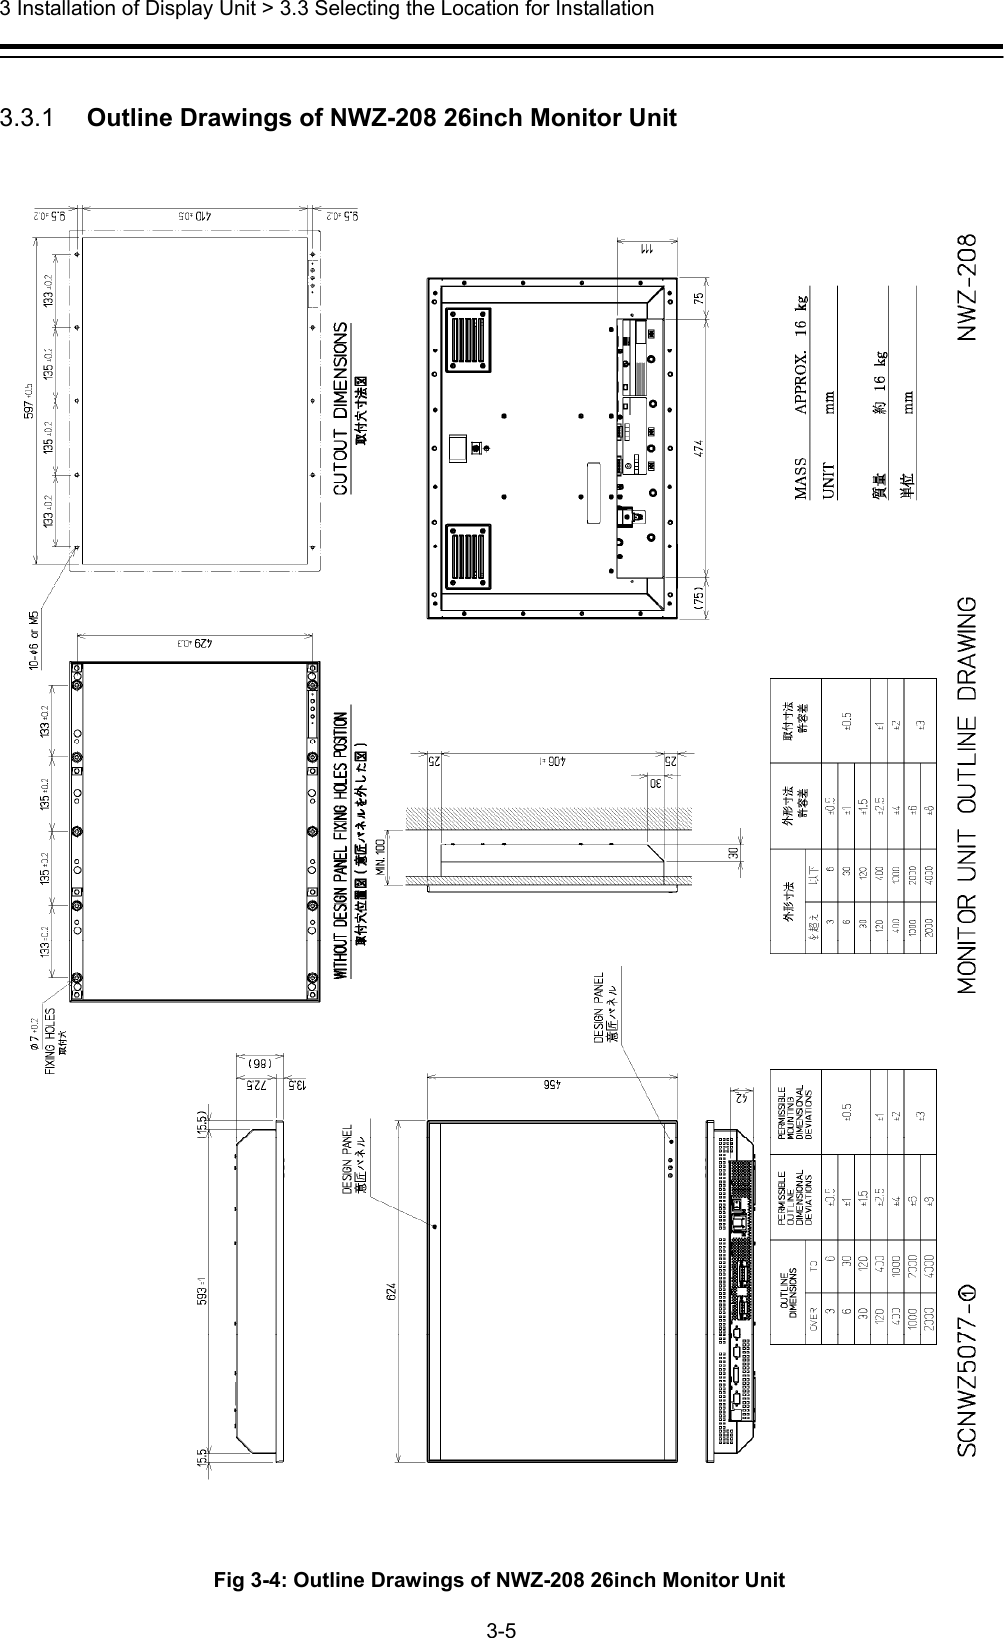  3 Installation of Display Unit &gt; 3.3 Selecting the Location for Installation 3-5   3.3.1   Outline Drawings of NWZ-208 26inch Monitor Unit    Fig 3-4: Outline Drawings of NWZ-208 26inch Monitor Unit 